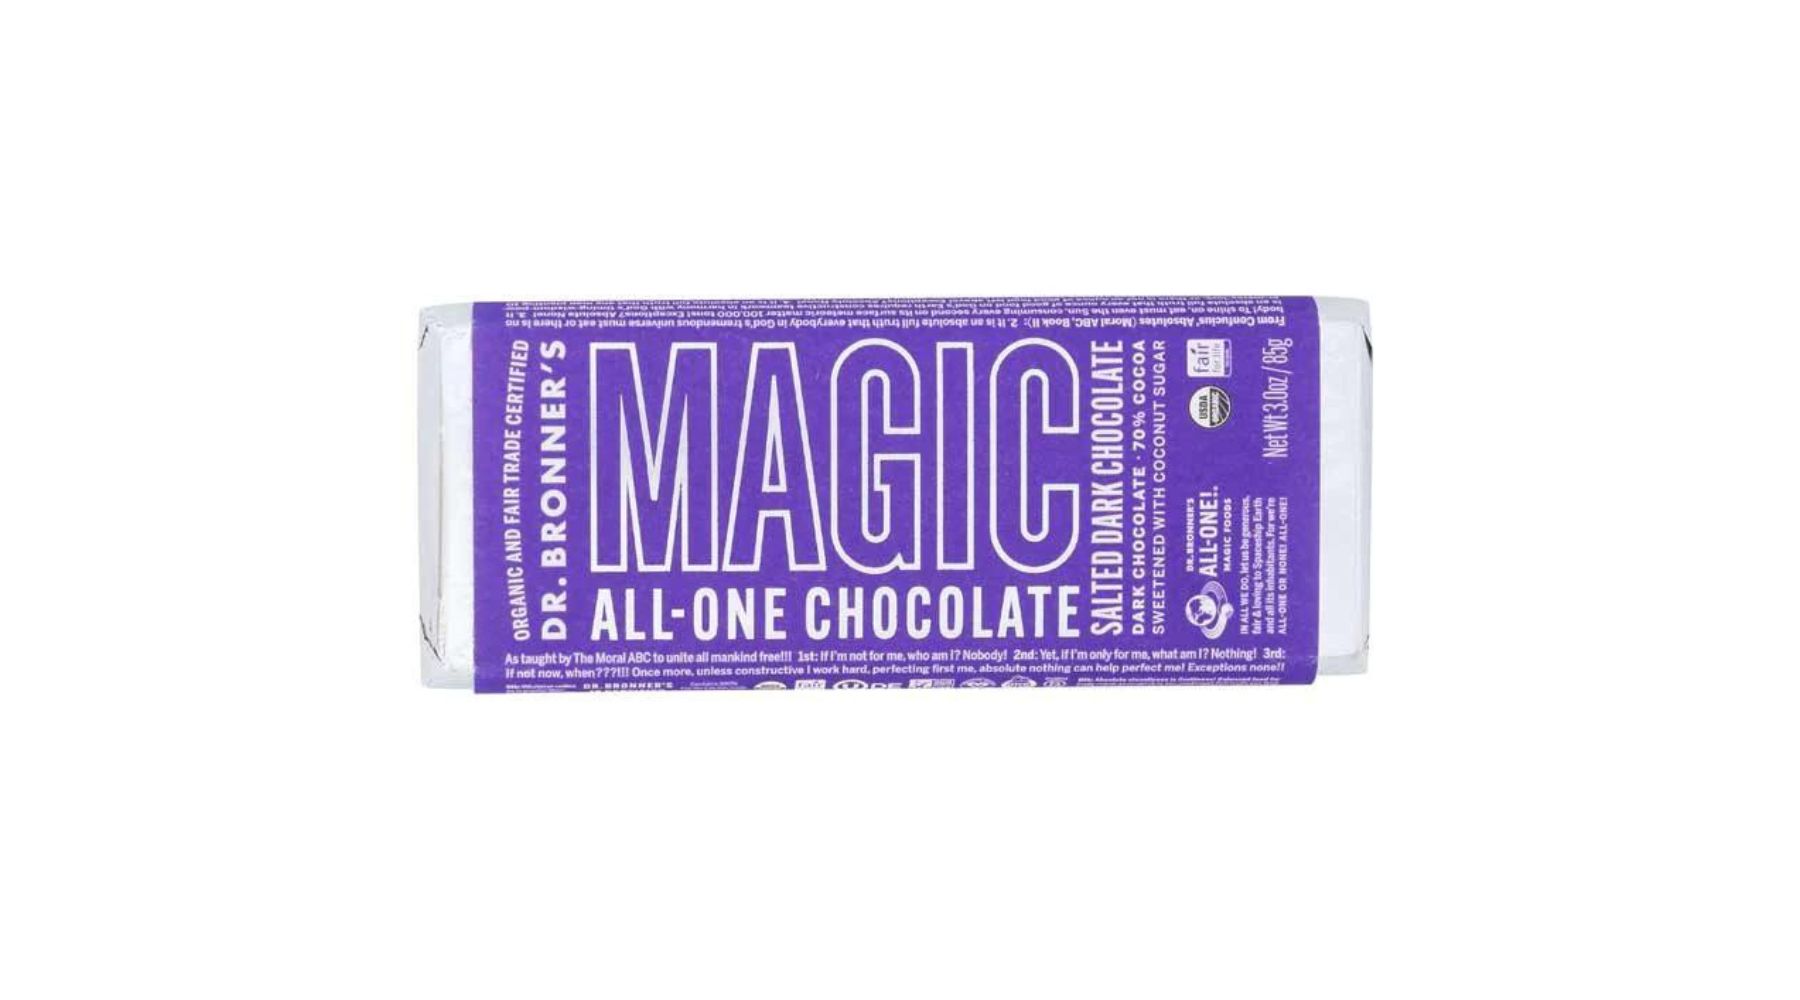 Dr. Bronner's - Magic All-One Chocolate Bars, 3oz Multiple Flavors